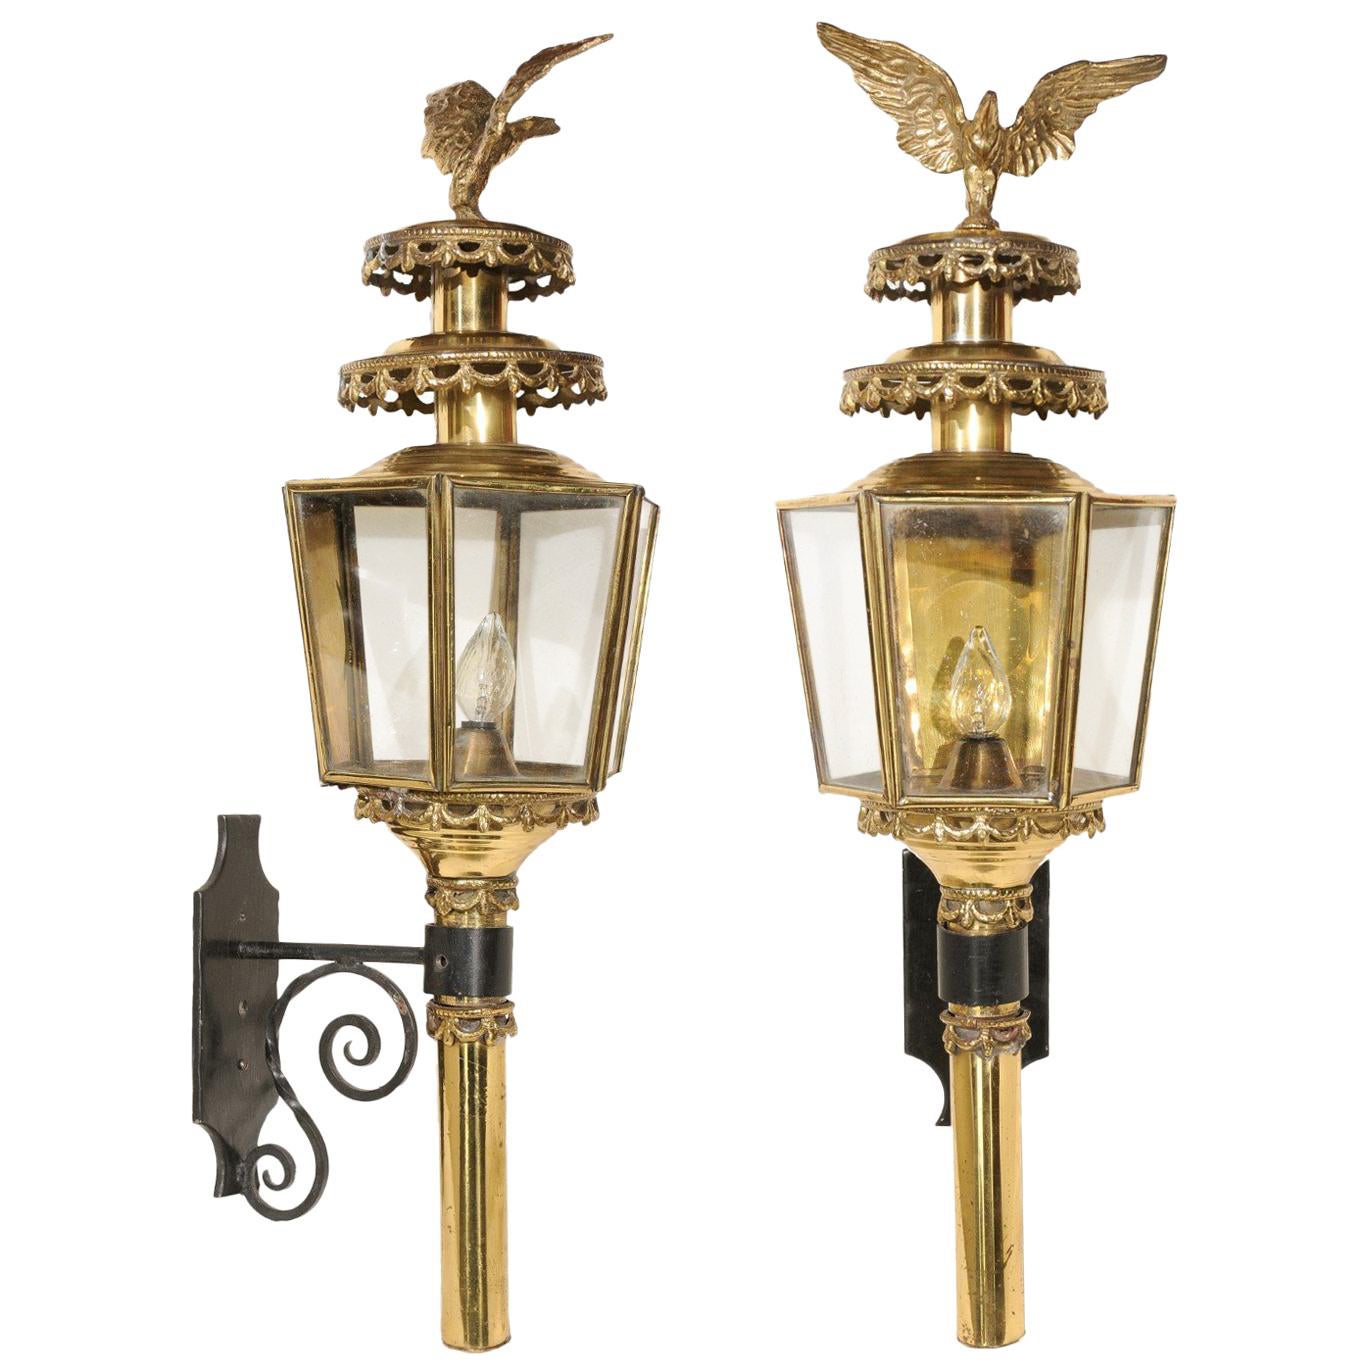 Pair of American 1900s Brass Lanterns with Eagles and Hexagonal Glass Body